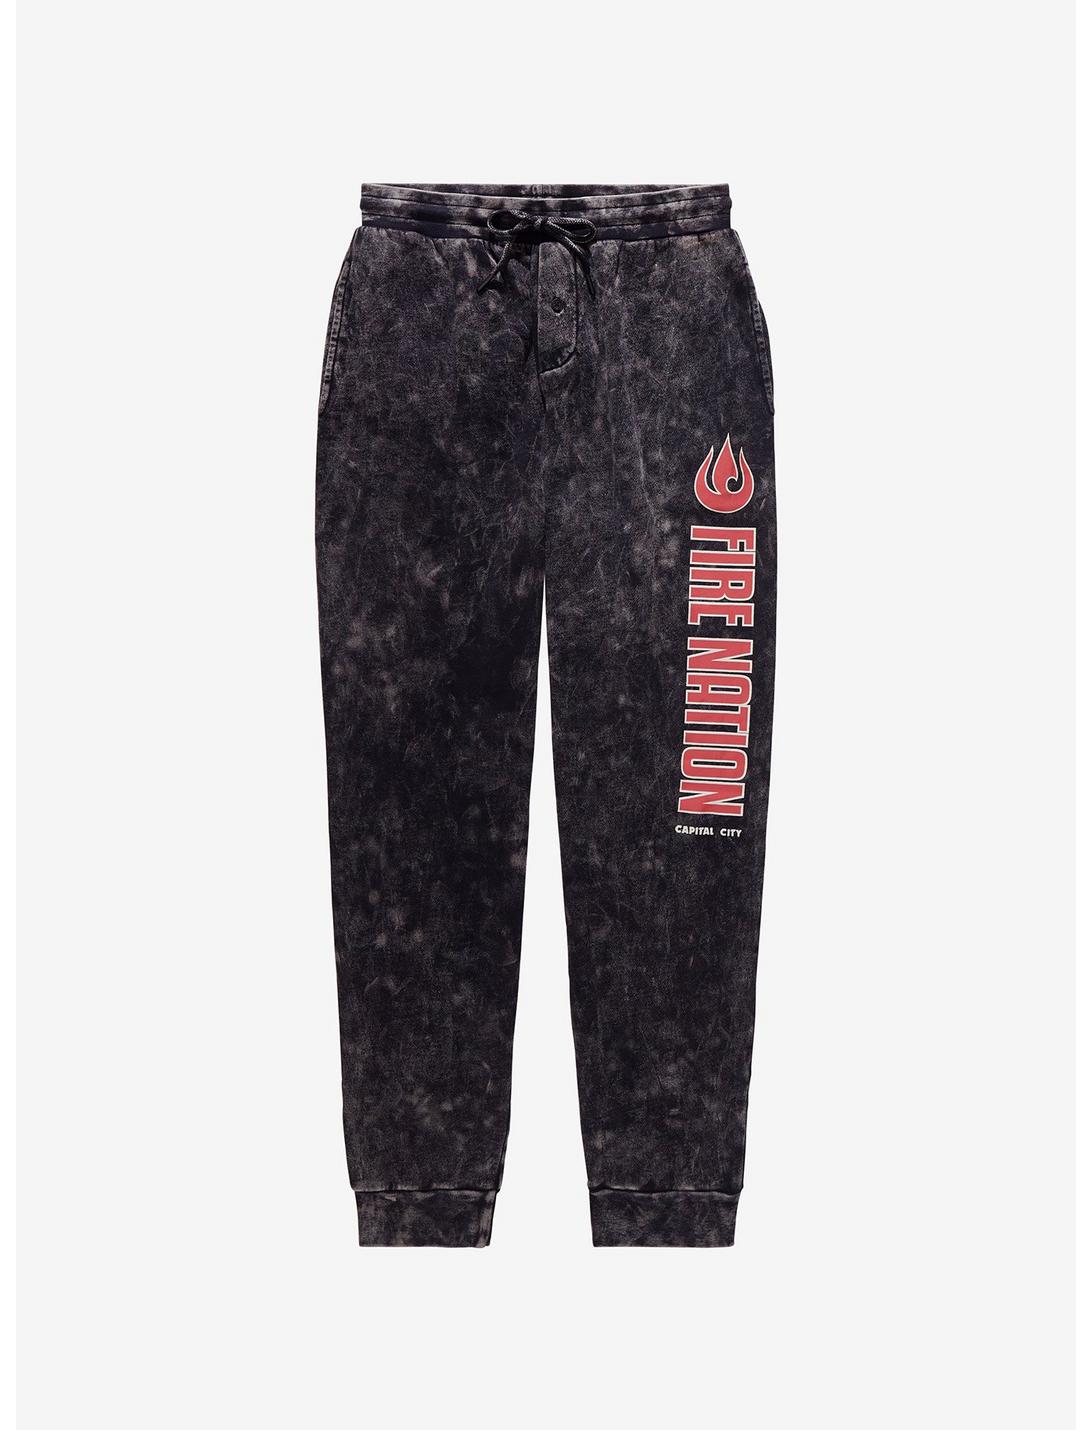 Avatar: The Last Airbender Fire Nation Acid Wash Joggers - BoxLunch Exclusive, DARK WASH, hi-res